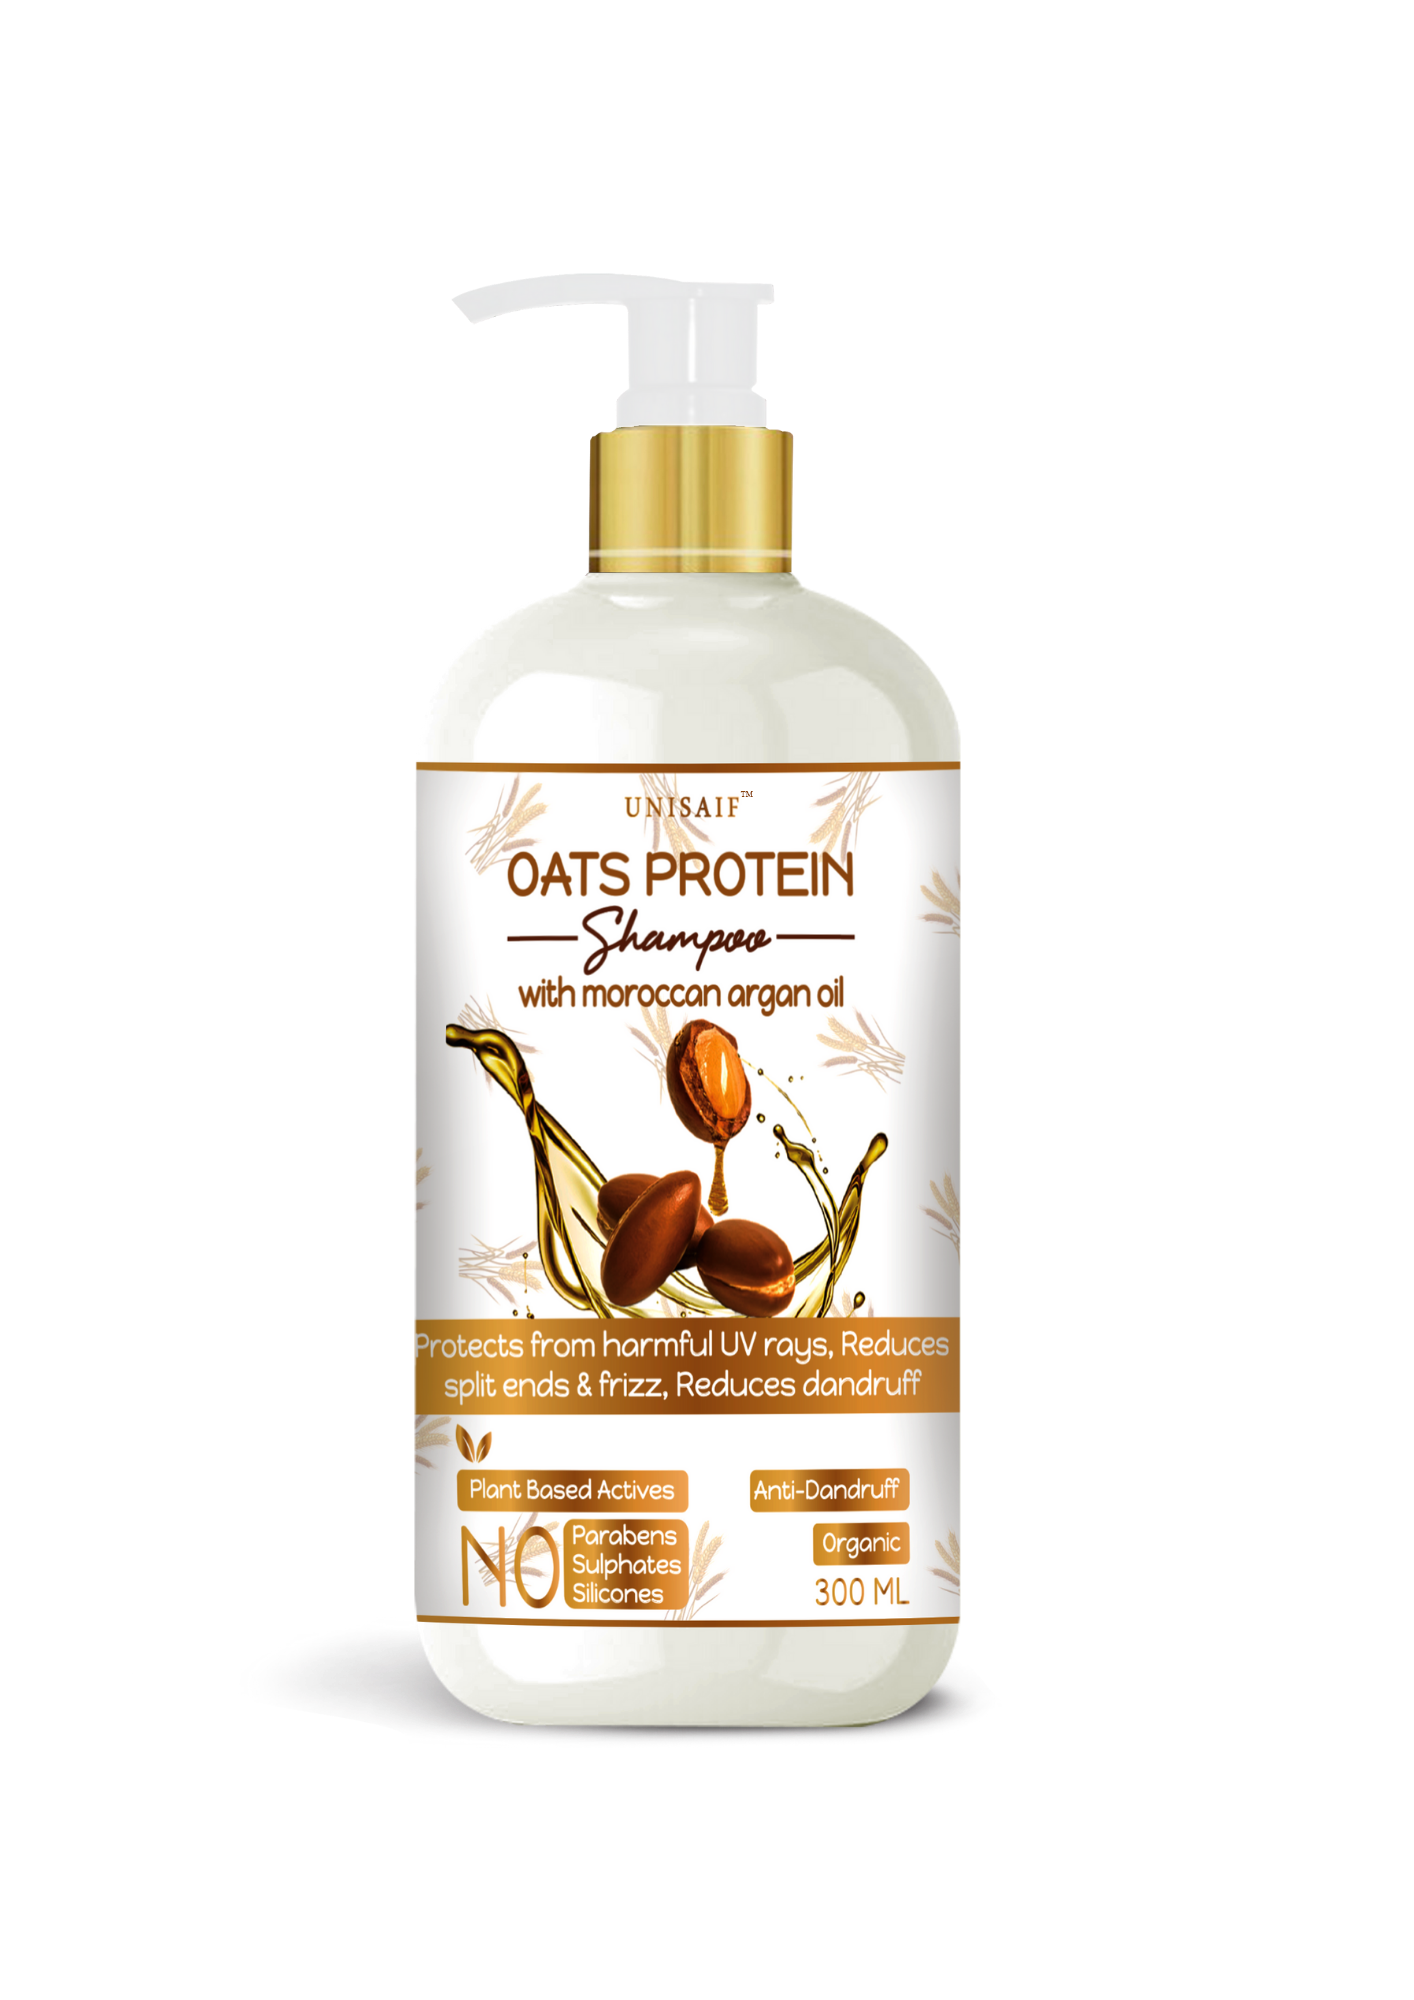 Oats Protein Organic Shampoo (300ml) With Moroccan Argan Oil |Split Ends & Frizz Control | Strengthening | Damage Repair | NO SULPHATE